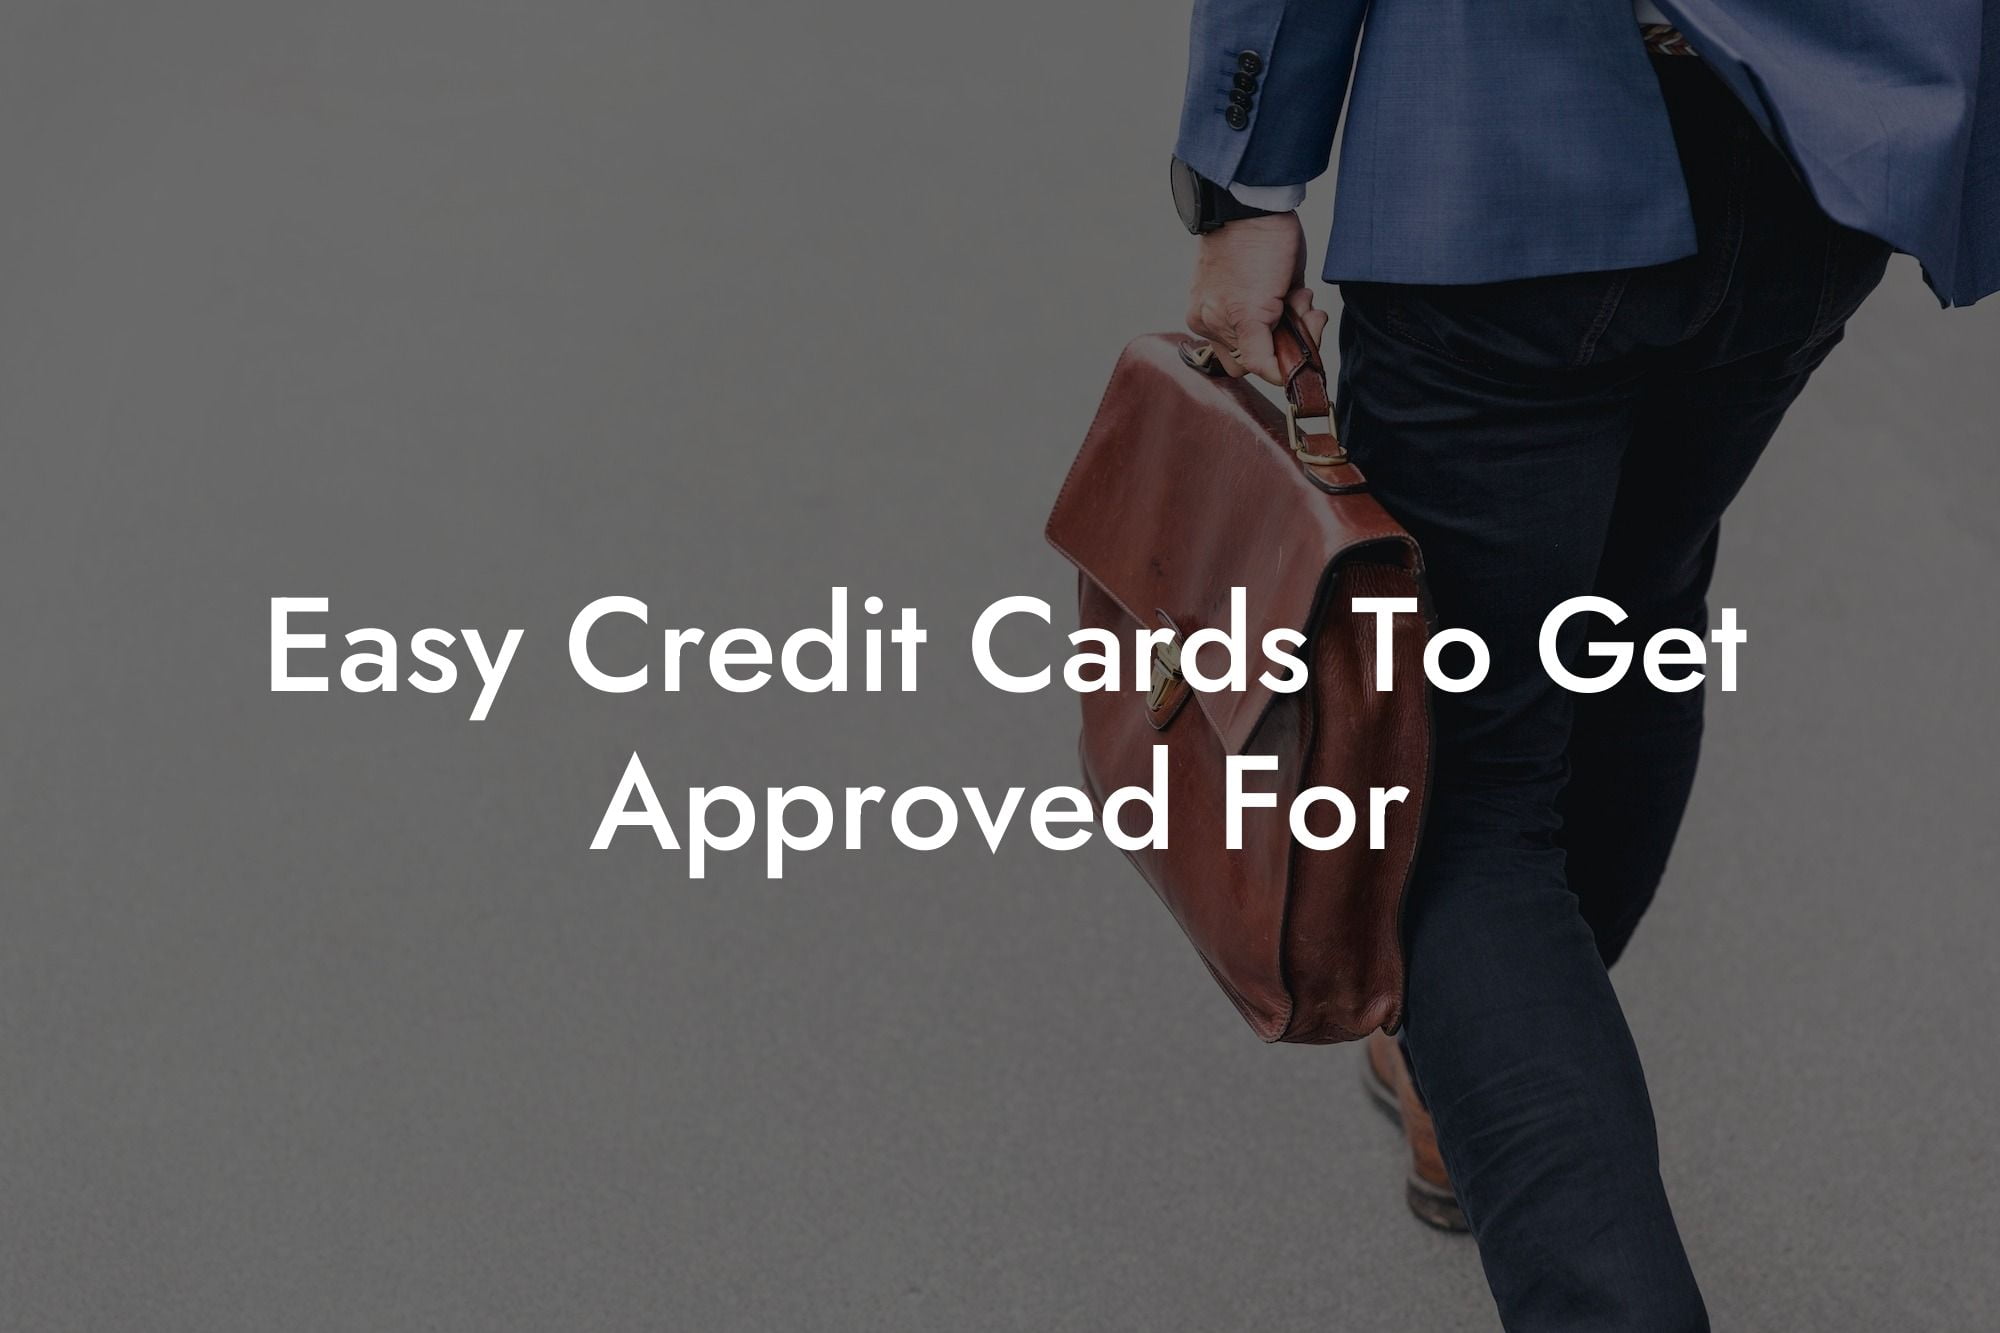 Easy Credit Cards To Get Approved For